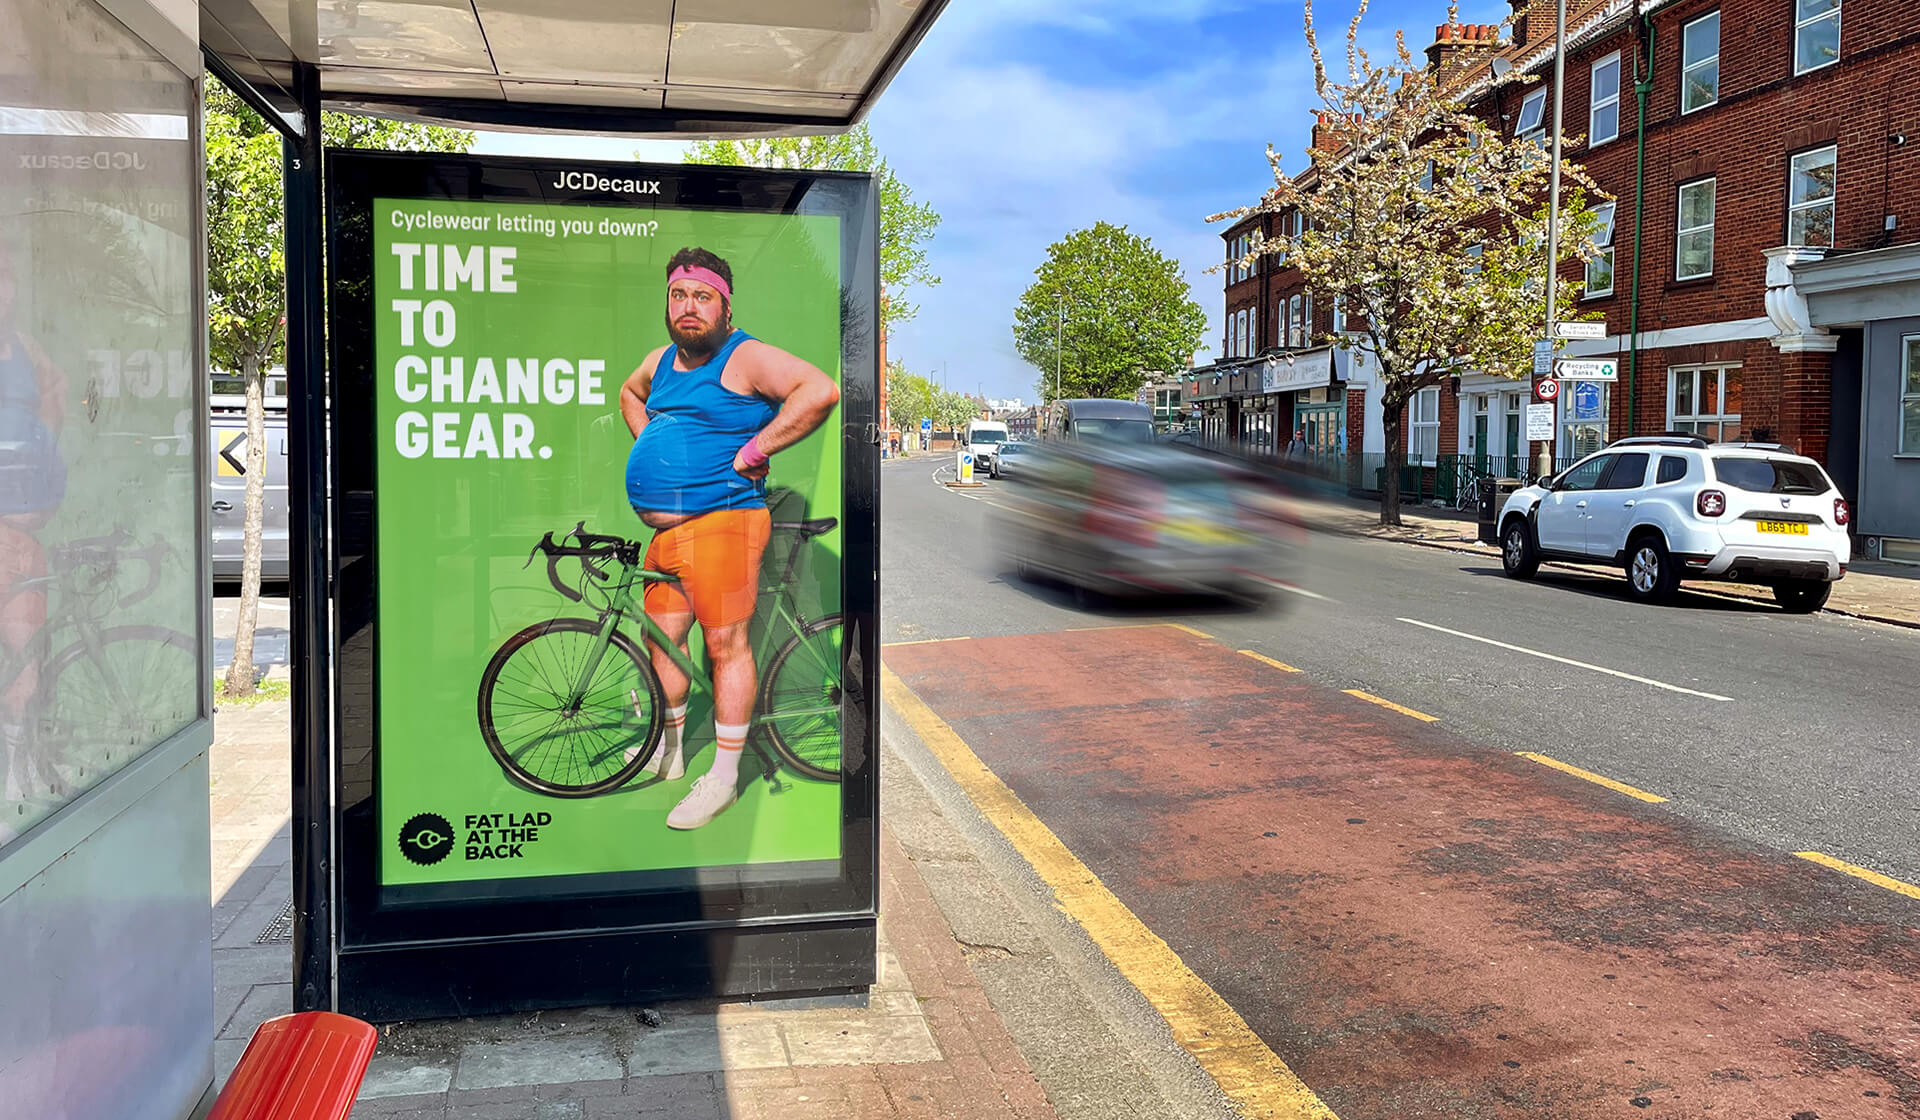 Fat Lad At The Back - Time To Change Gear - Ad Campaign by Mellor&Smith - Paul Mellor